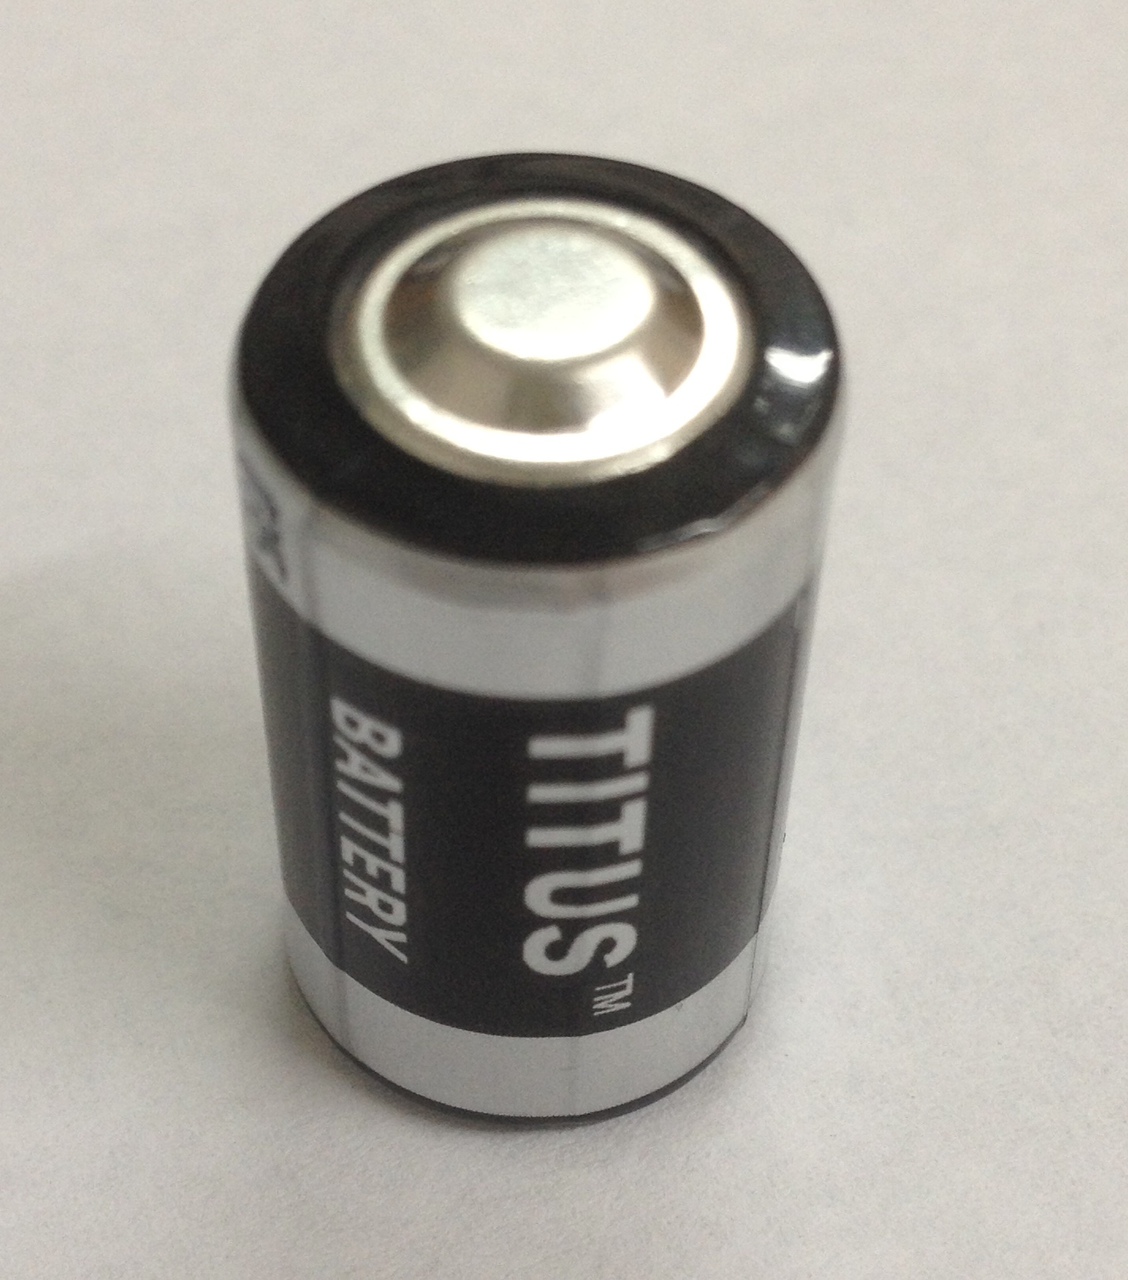 Titus 1/2 AA Size 3.6V ER14250MT High Energy Lithium Battery With Solder Tabs - 4 Pack + Free Shipping!